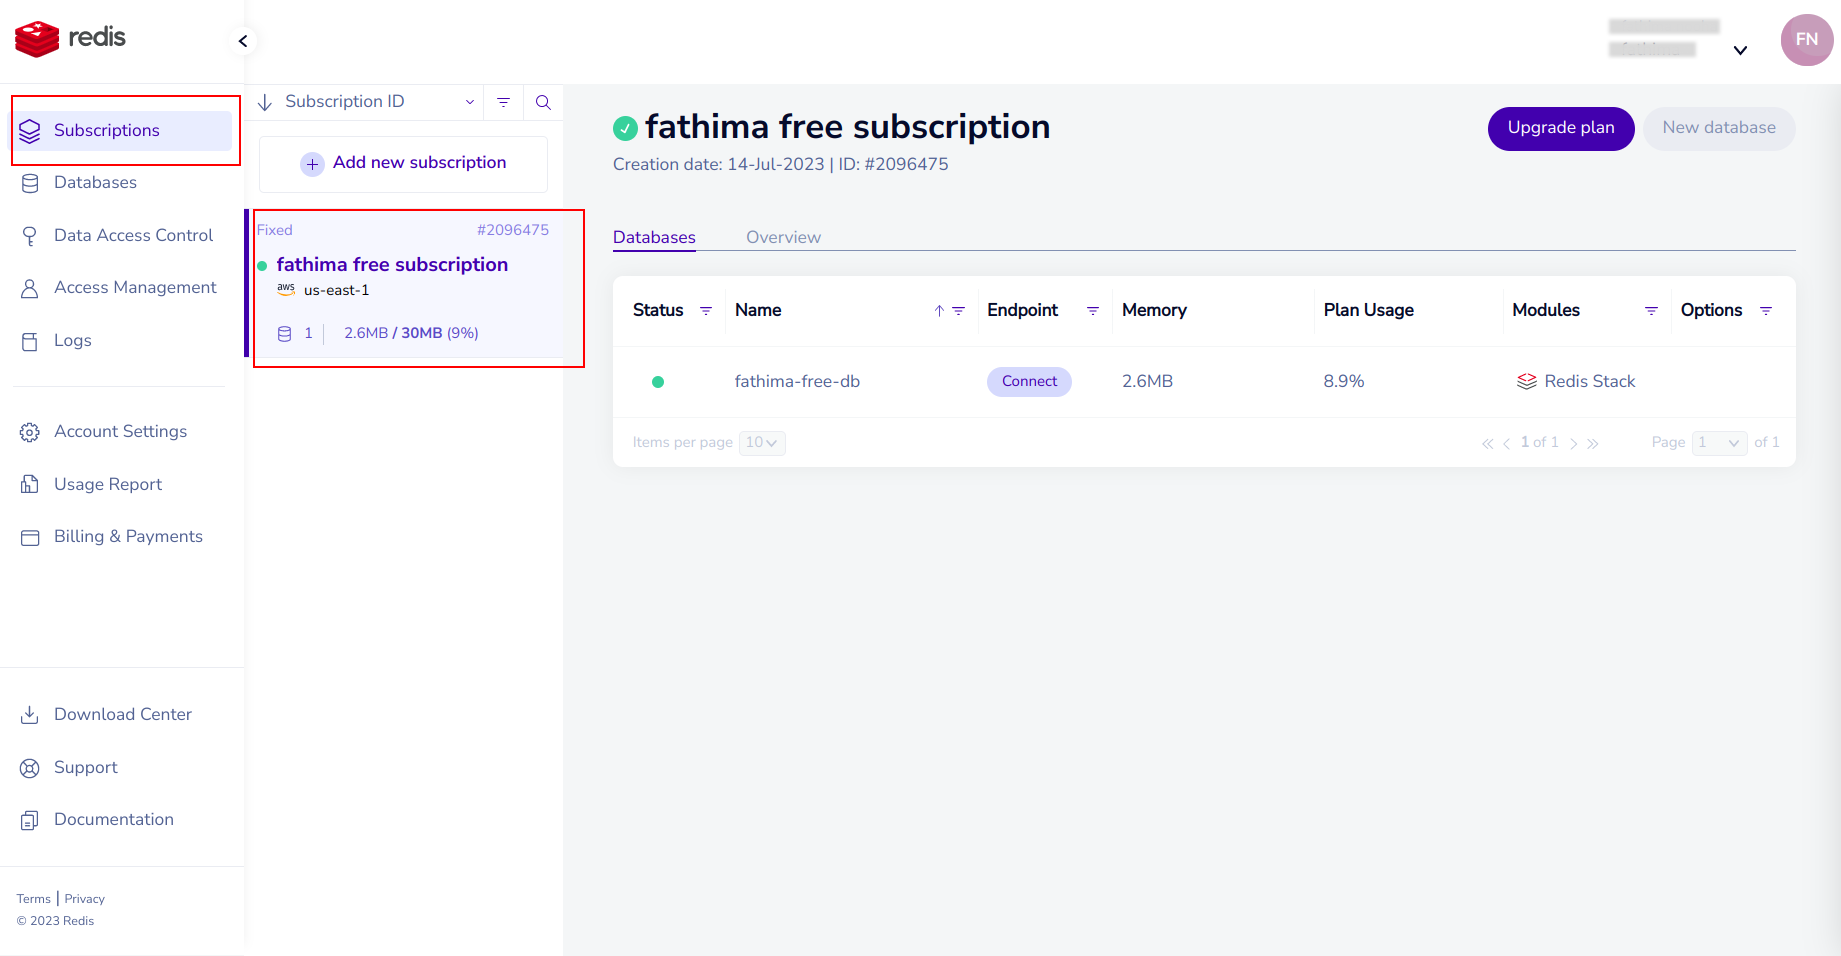 Redis Subscription section